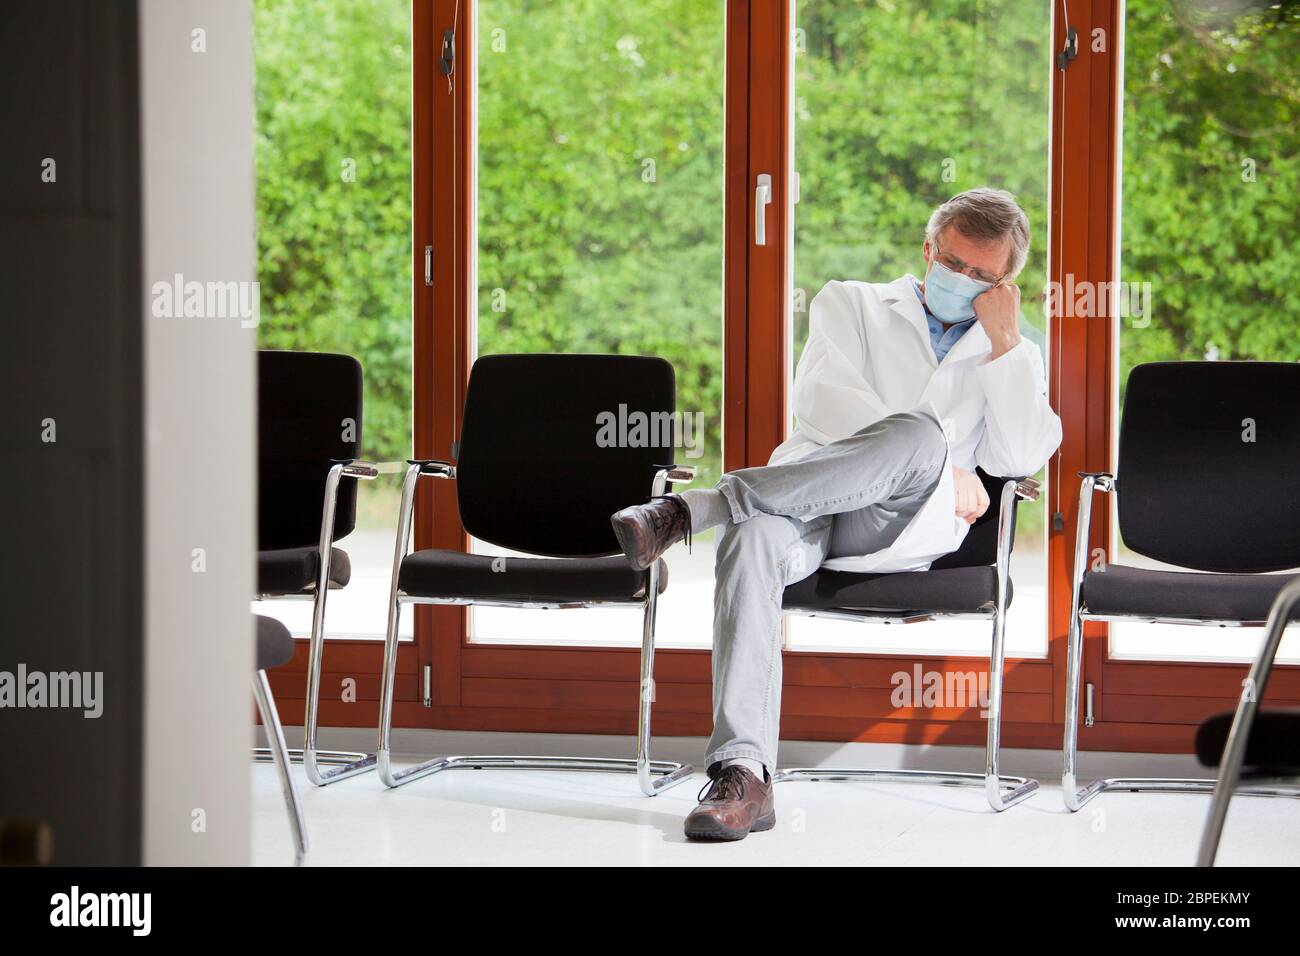 Overworked doctor with face mask sleeping in a chair in an empty waiting room - green background with plants Stock Photo